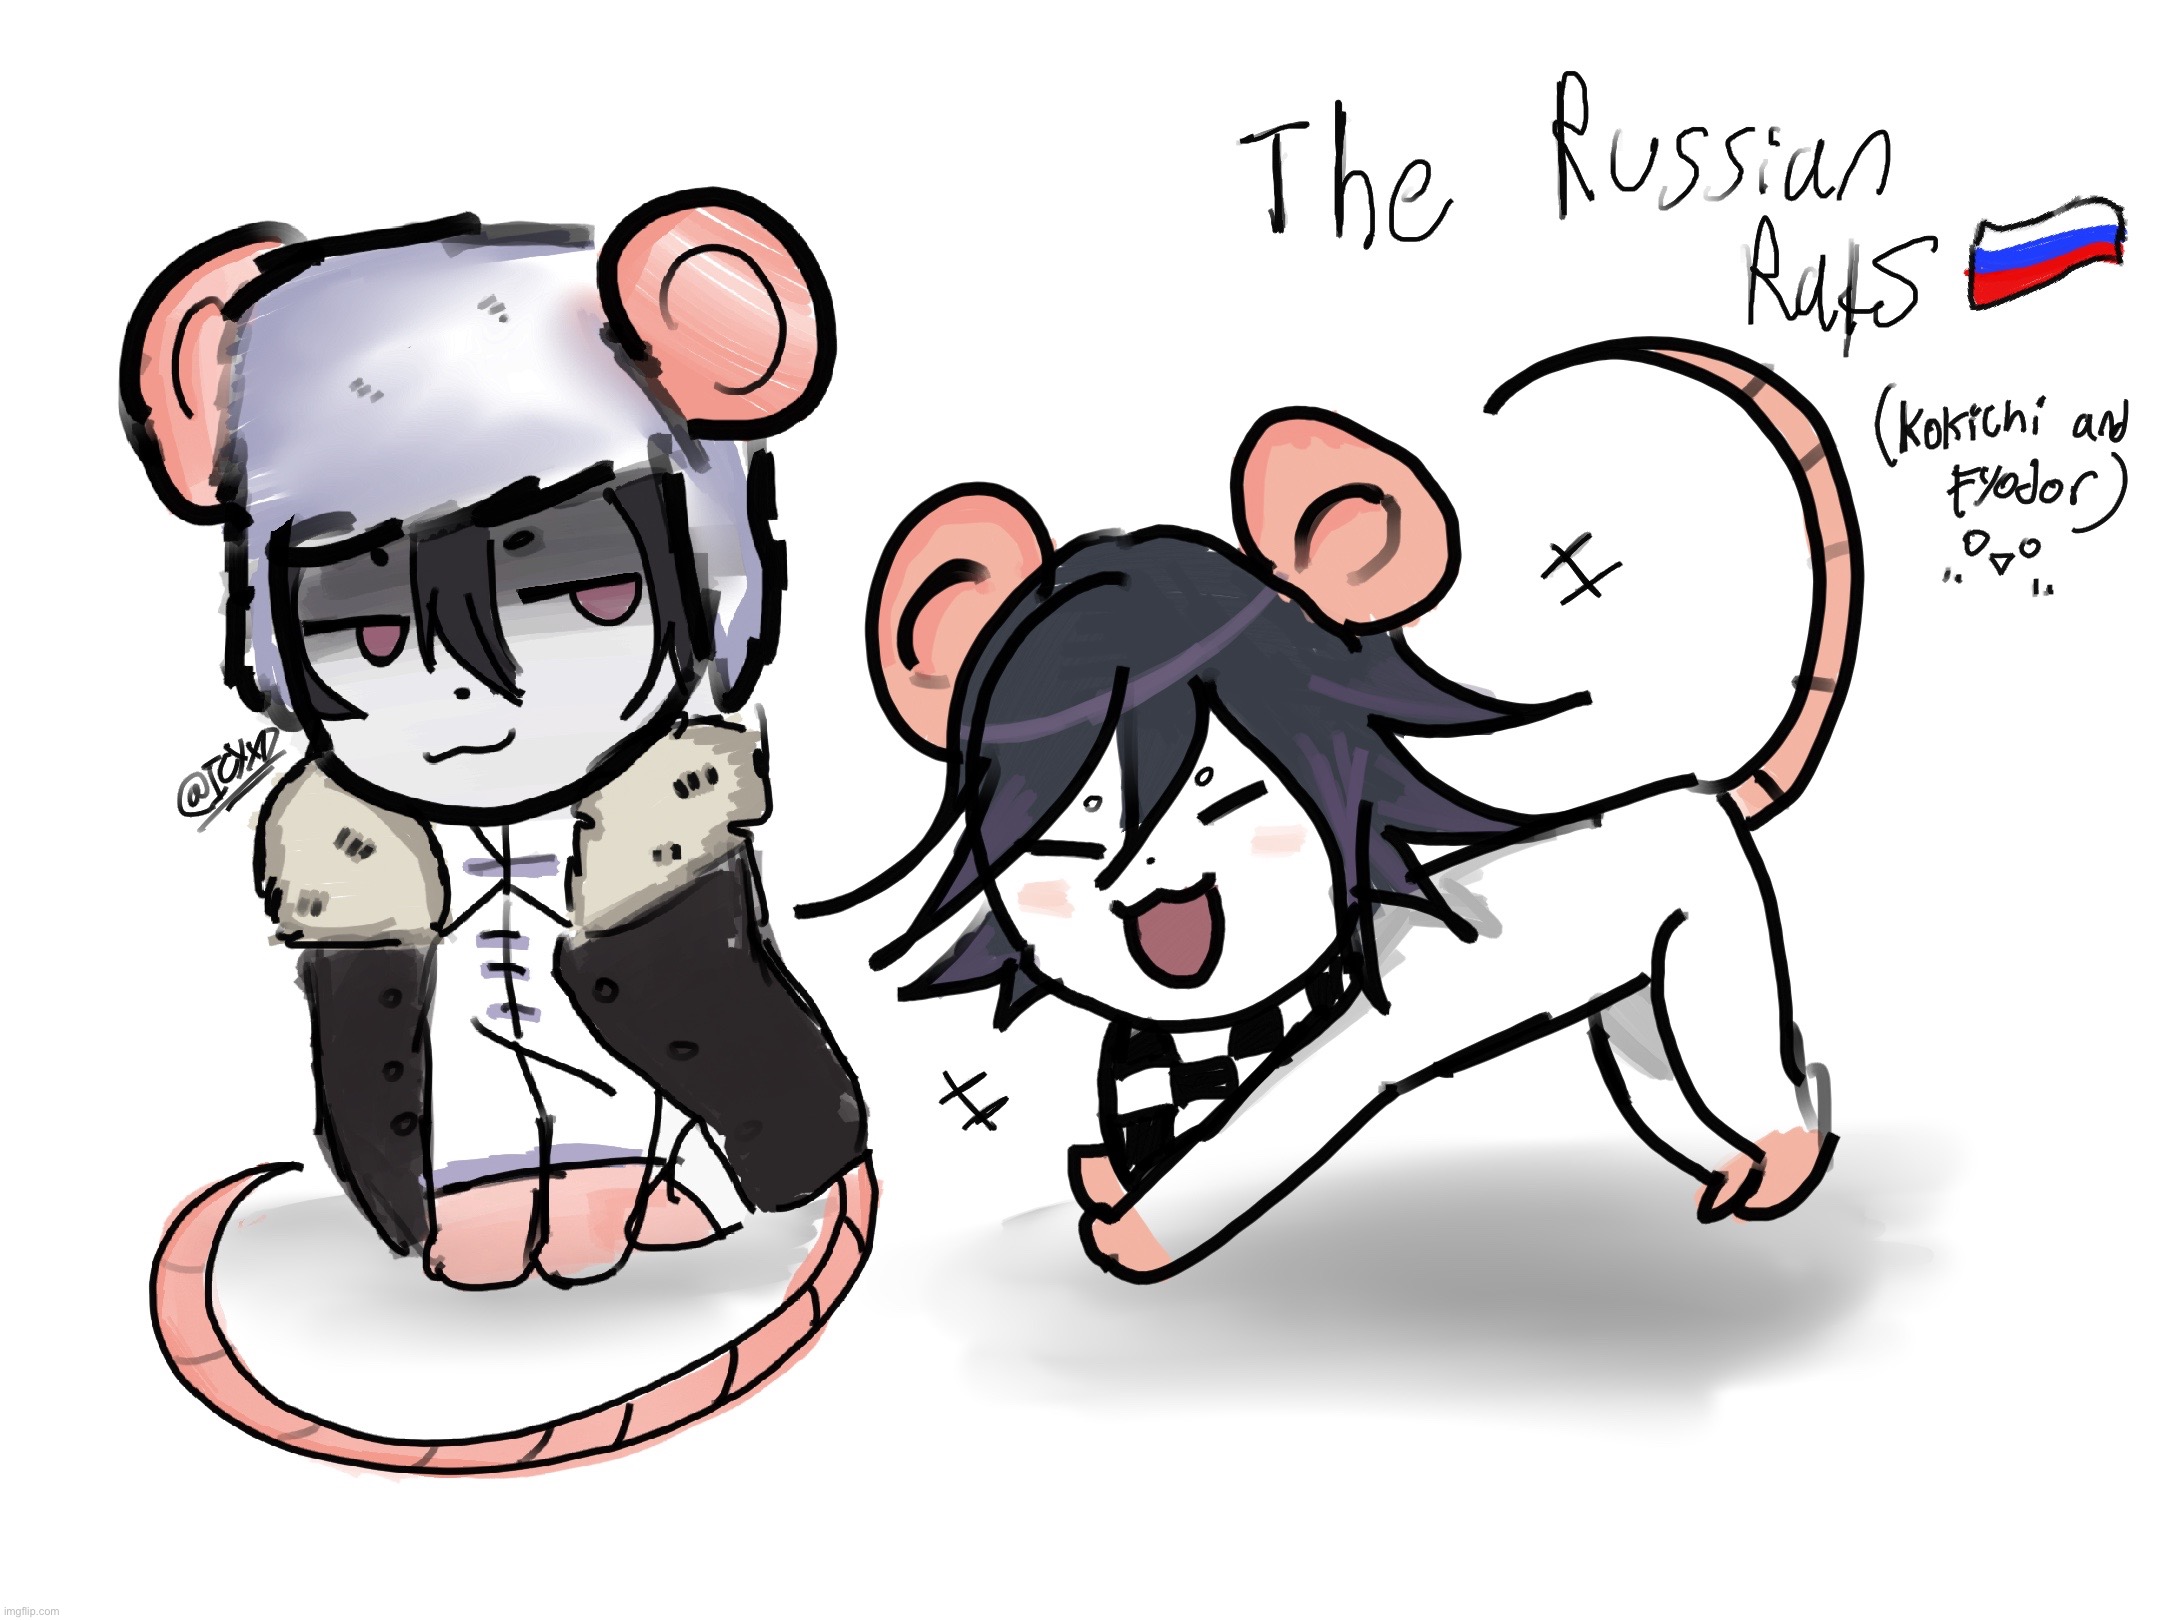 The Russian Rats (°▽°) | image tagged in russia,rats,anime,kokichi oma,fyodor dostoevsky | made w/ Imgflip meme maker